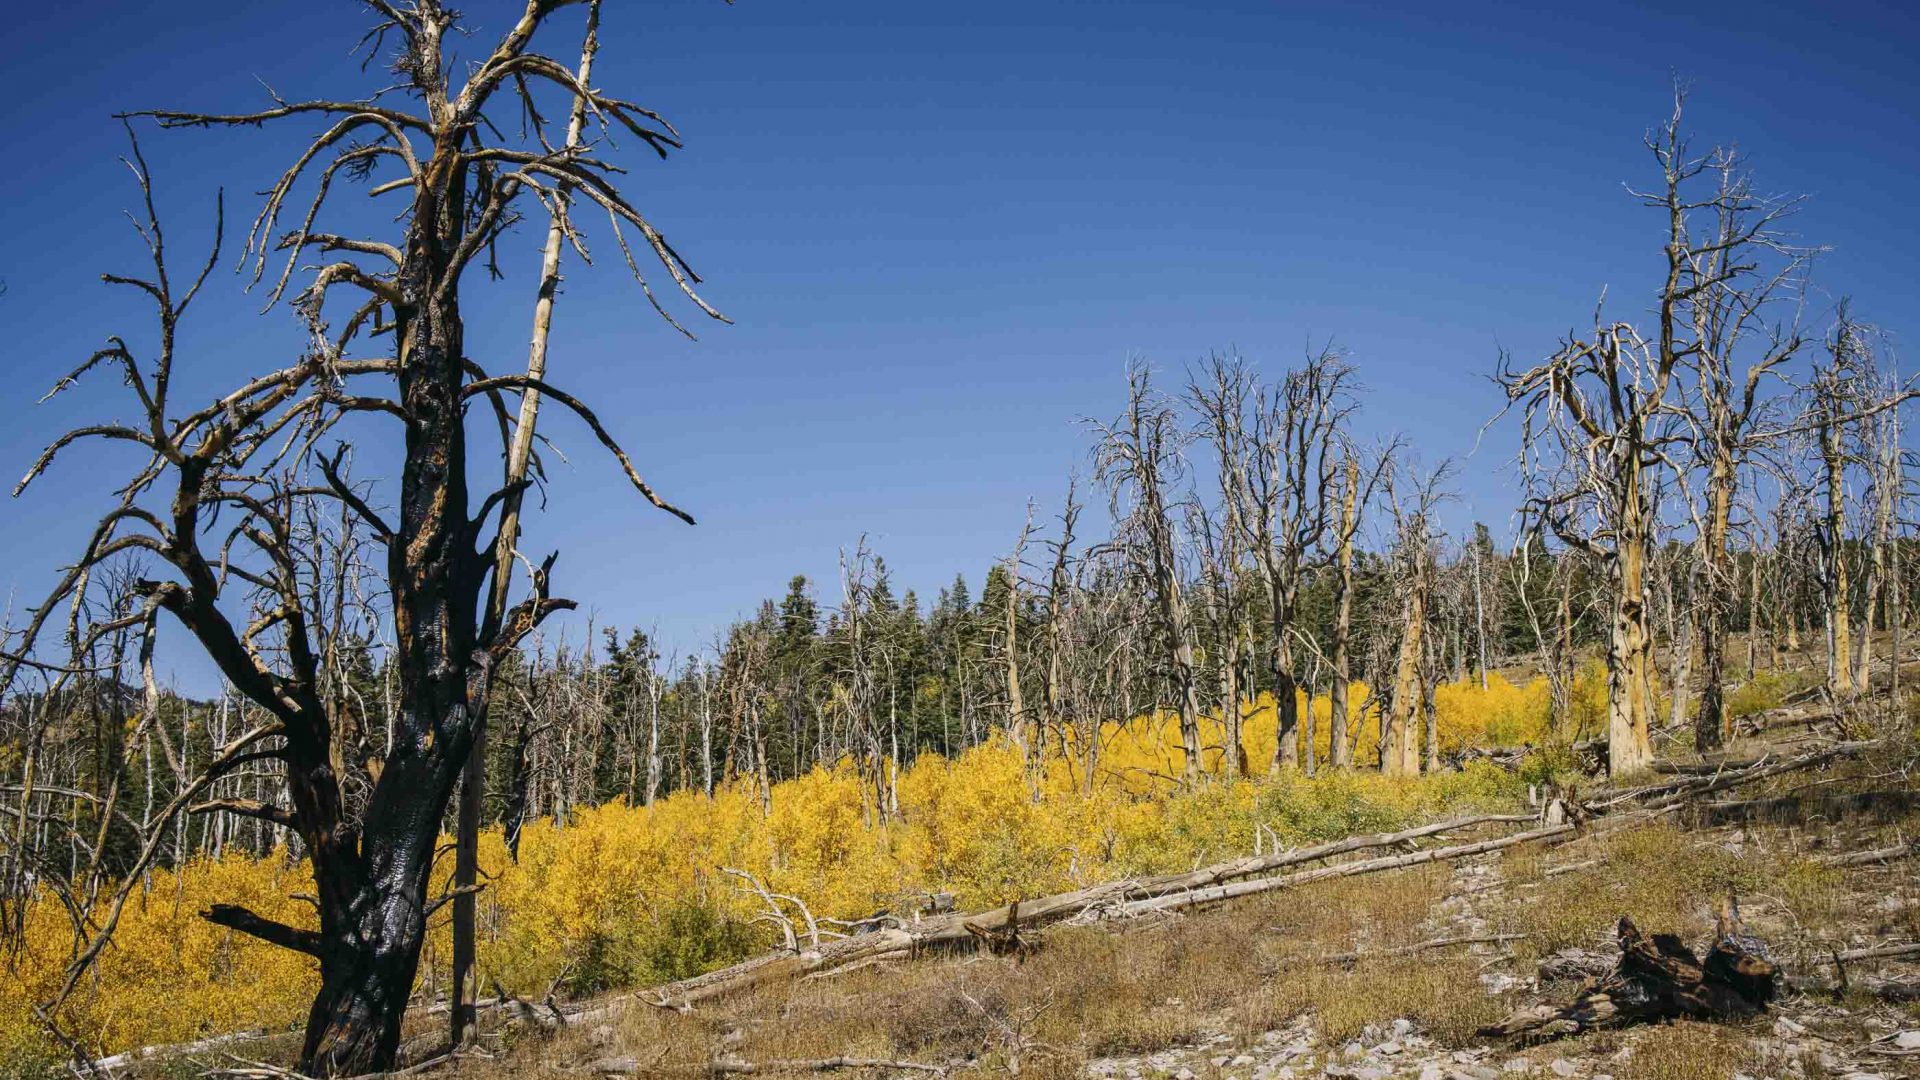 A dead tree stands in the foreground on a yellow and green hill.